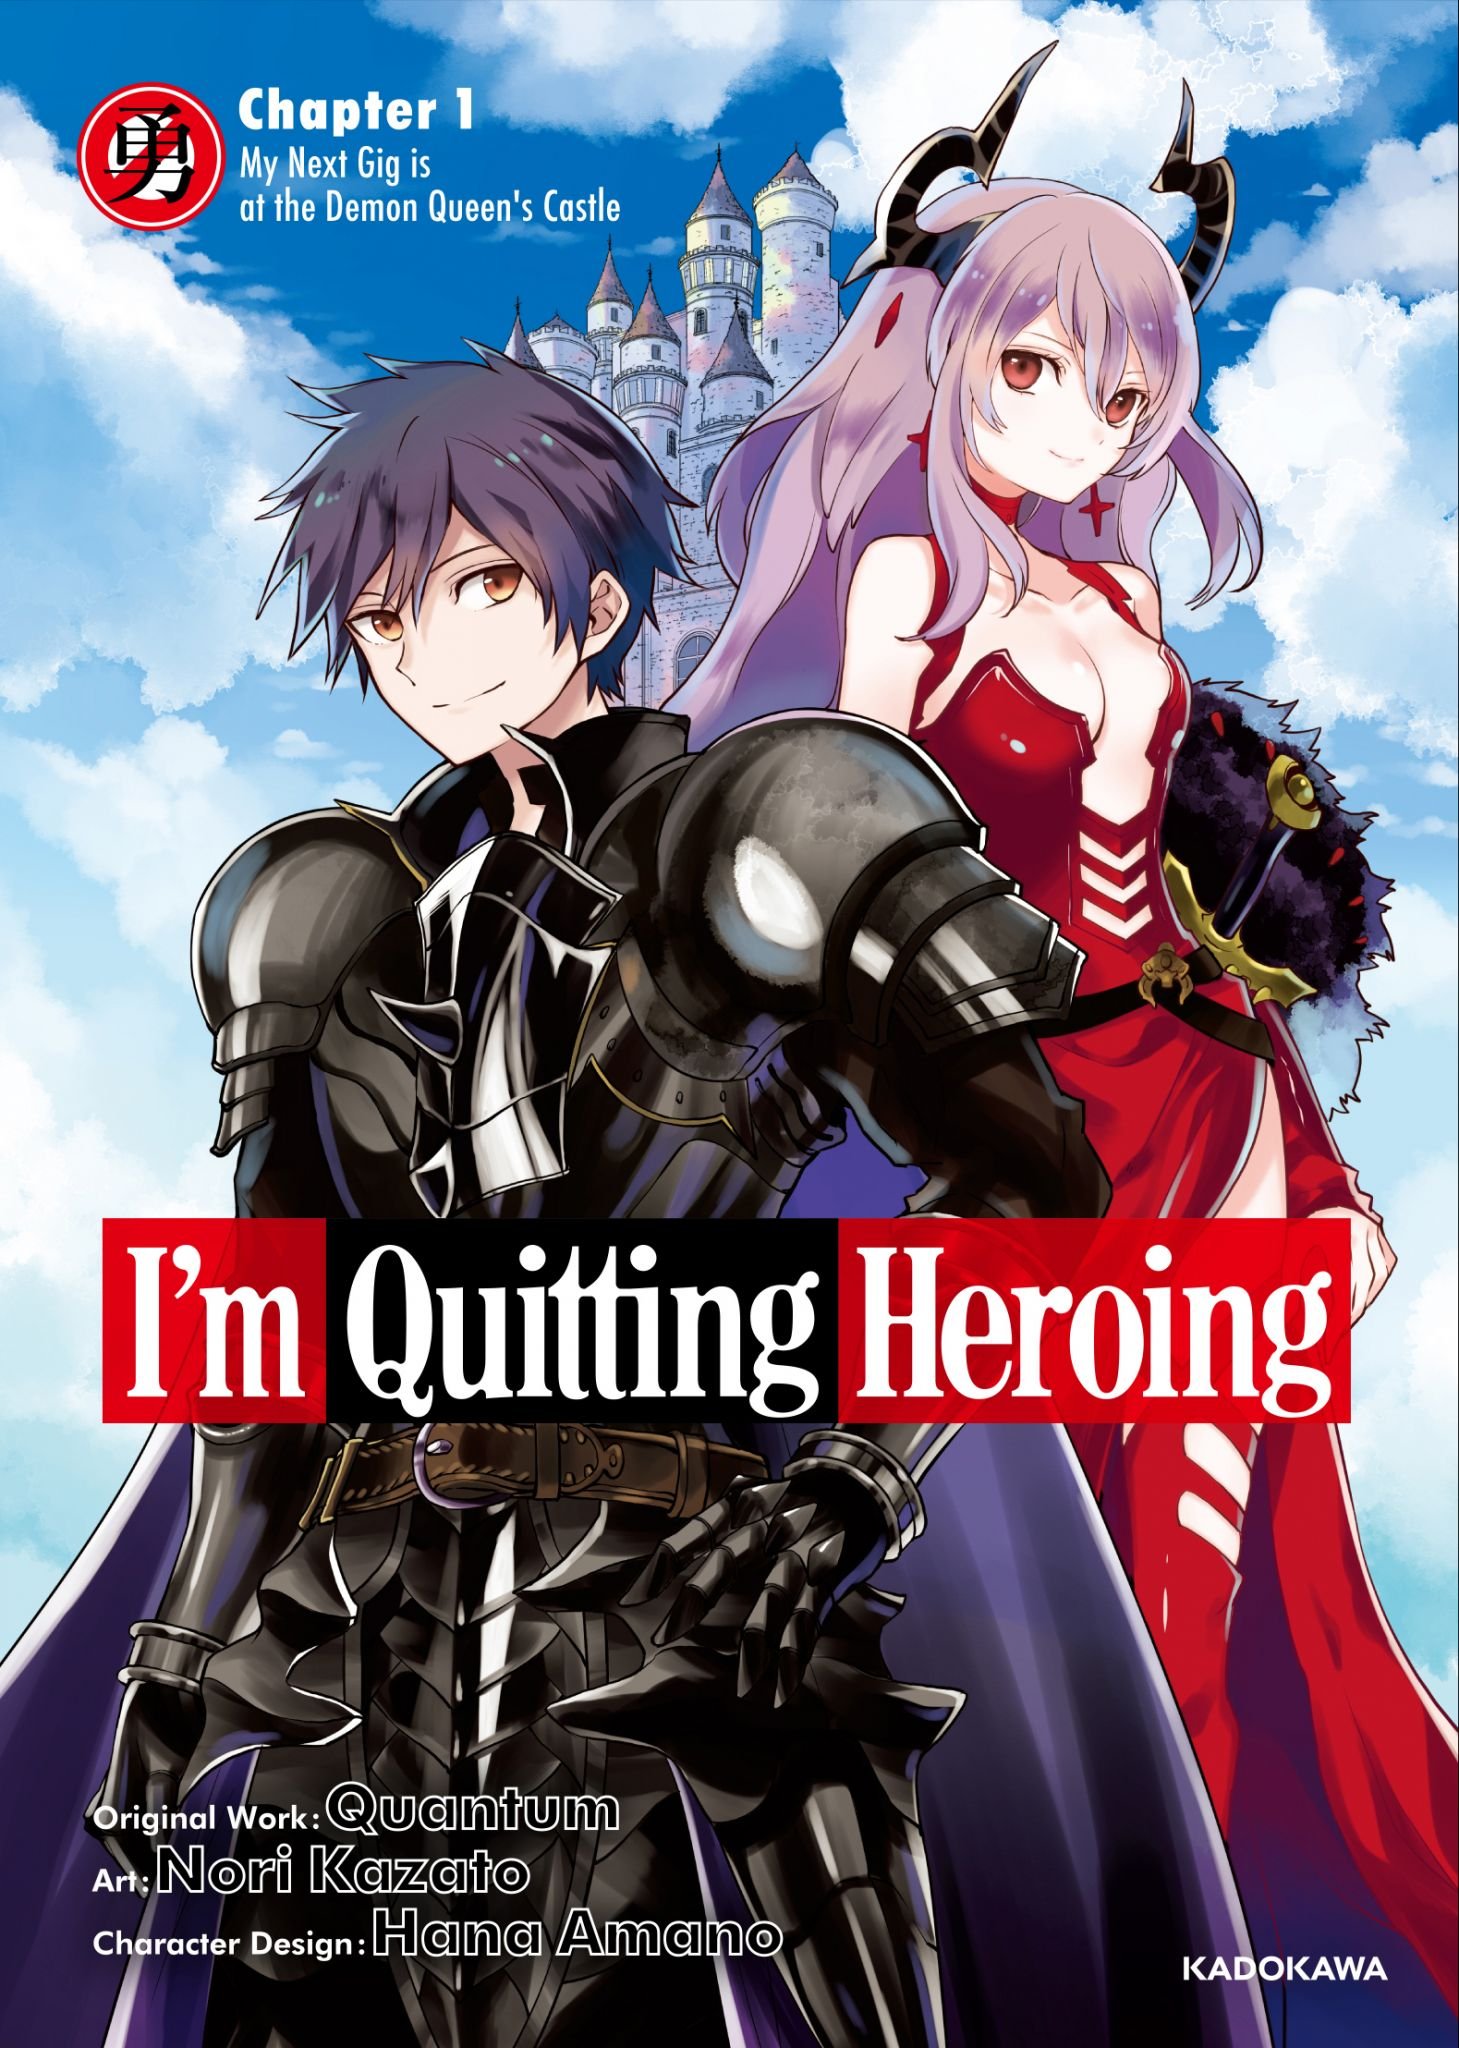 Im Quitting Heroing Receives Anime Adaptation